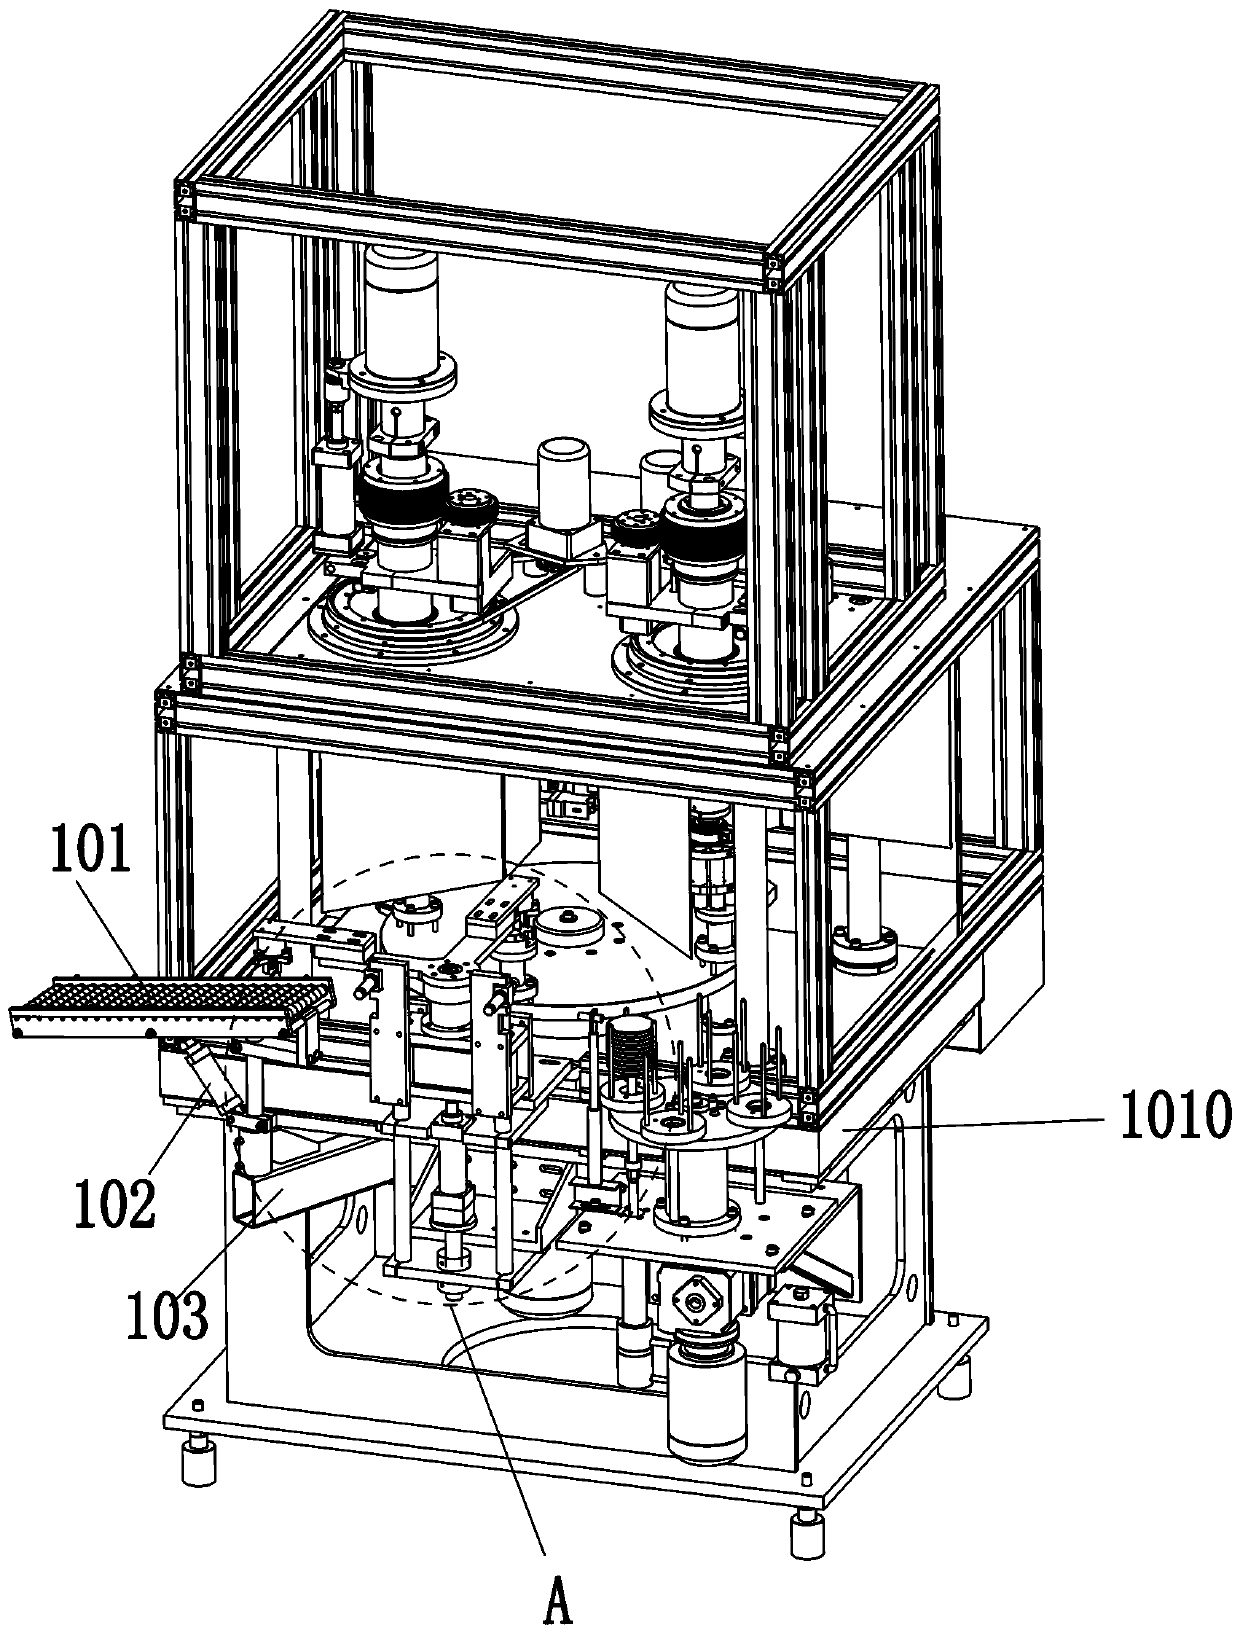 An automatic grinding machine